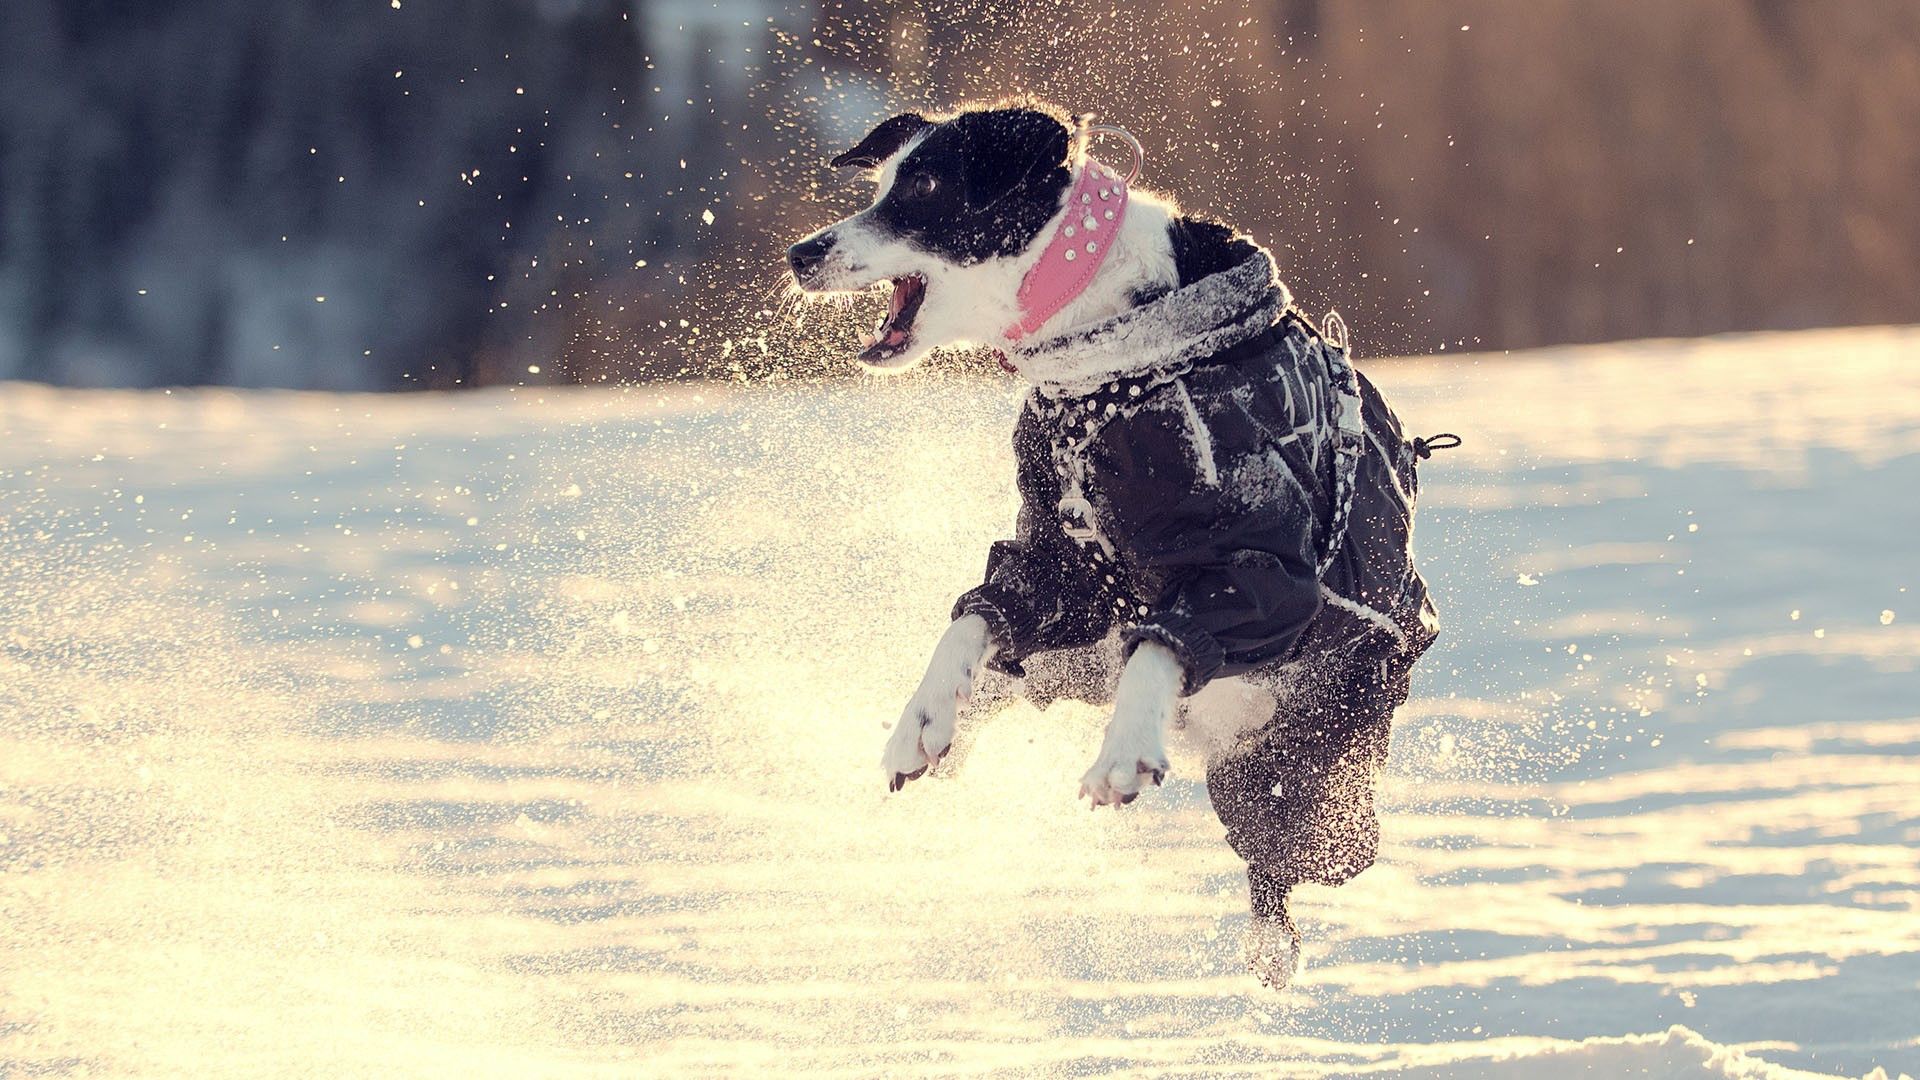 wallpapers animals, snow, dog, stroll, bounce, jump